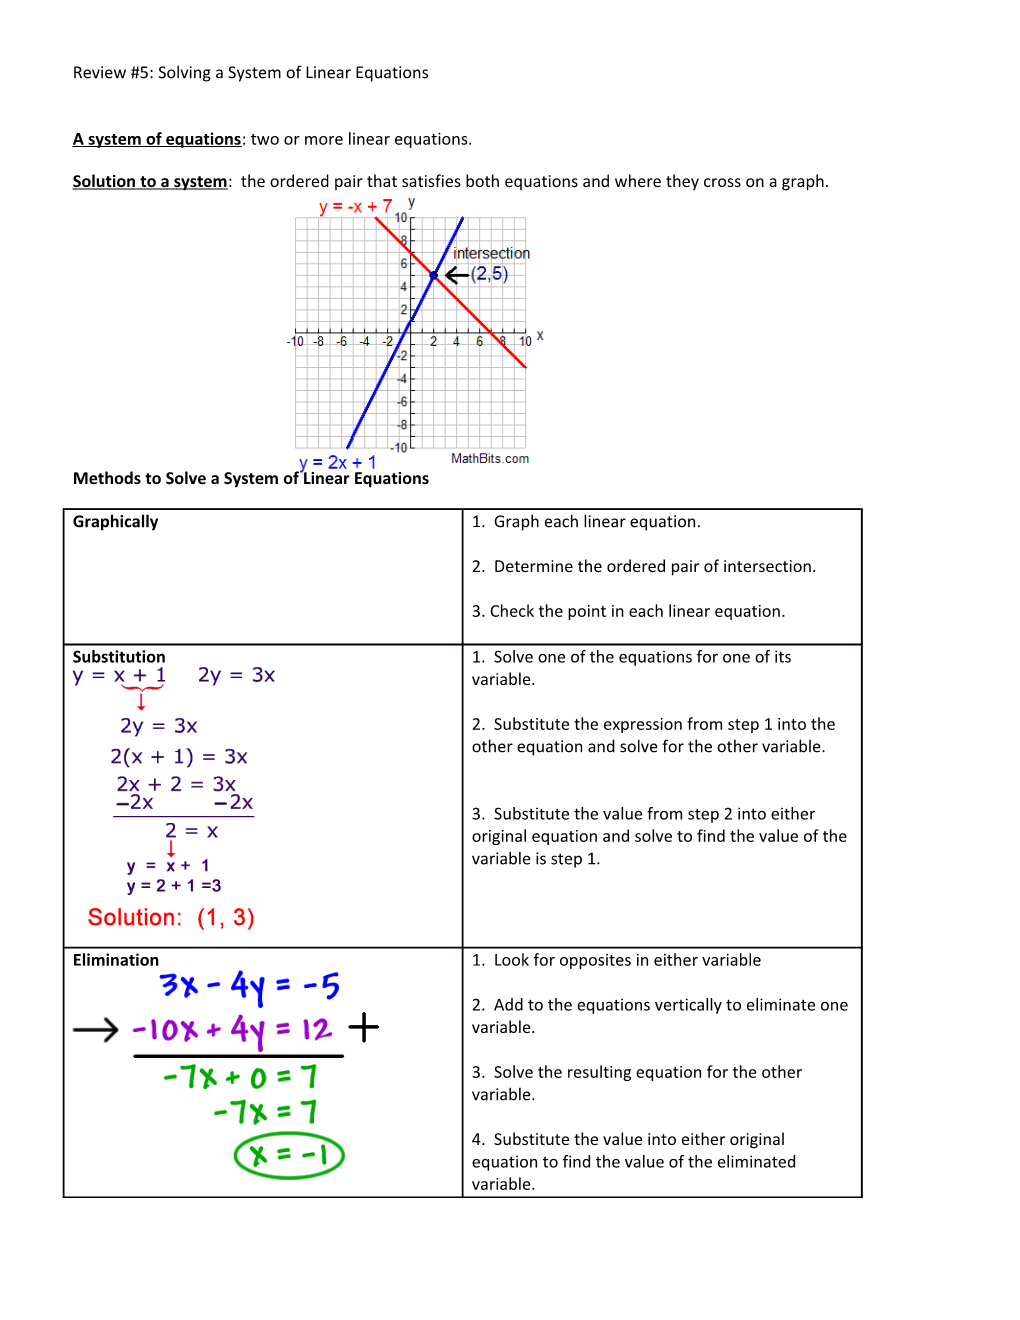 Review #5: Solving a System of Linear Equations